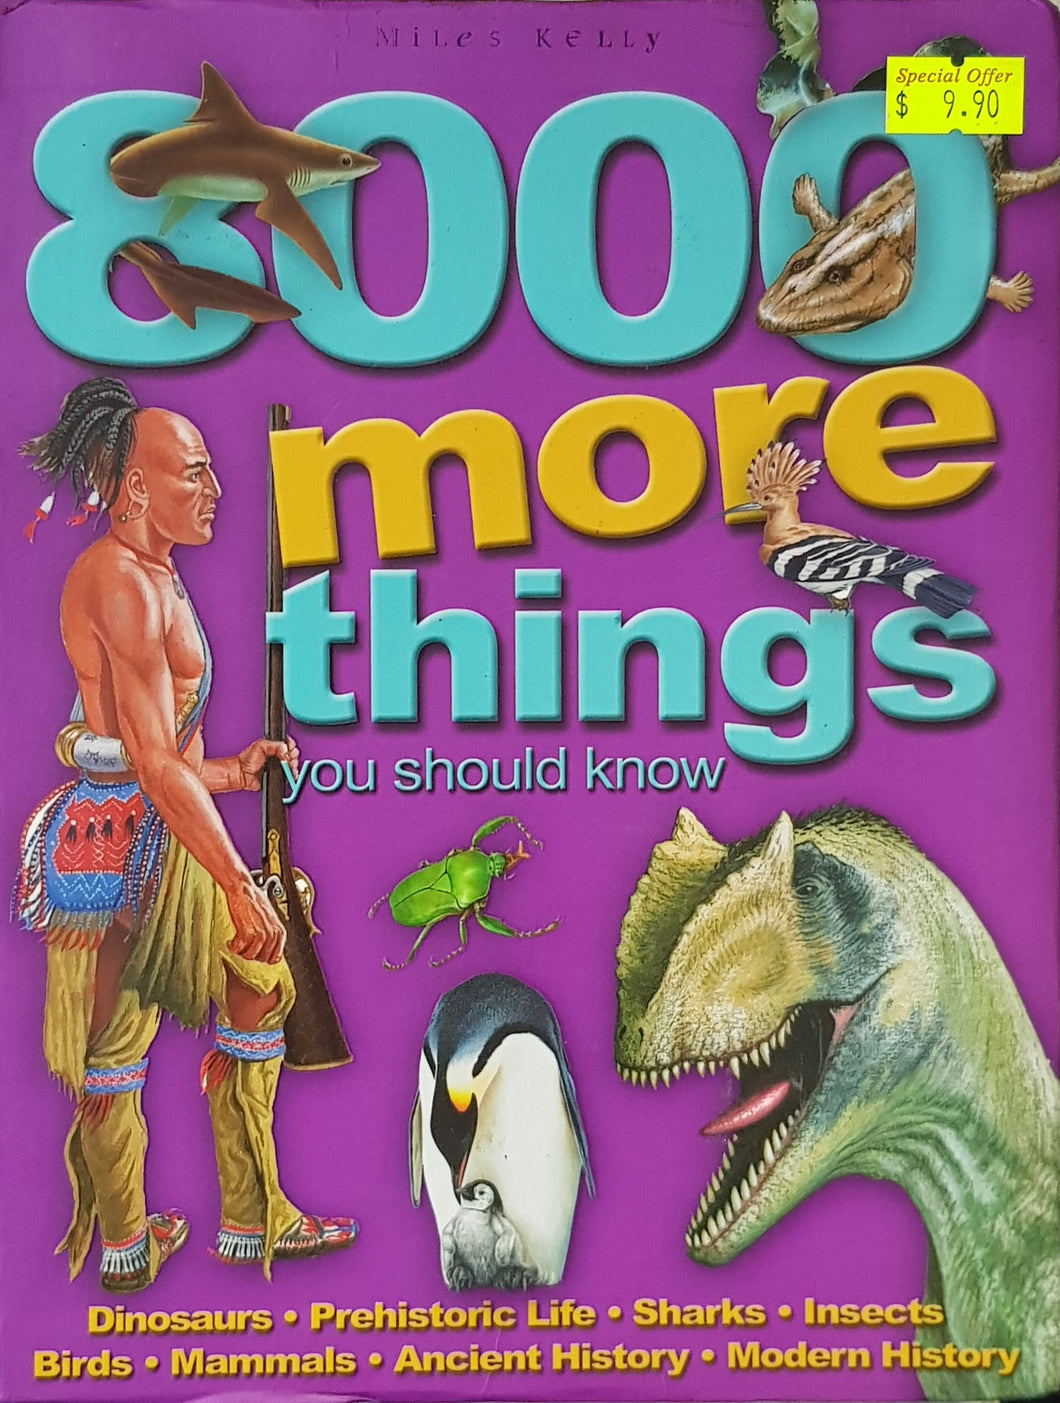 8000 More Things You Should Know - Miles Kelly